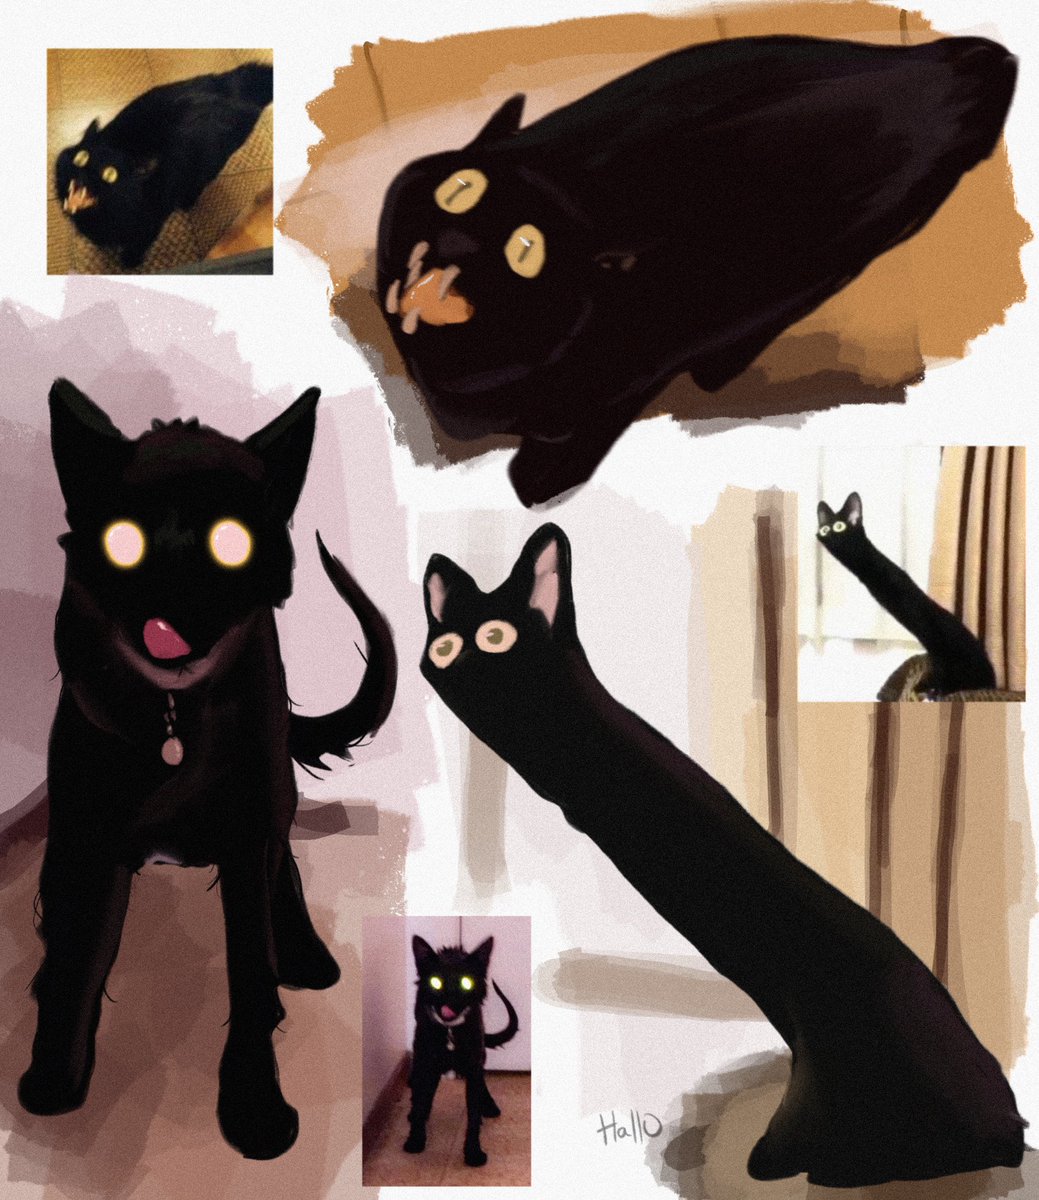 Haven’t done this for a while but here’s some cursed cat doodles
#cursedcats #CatsOfTwitter #illustrationart #Doodles